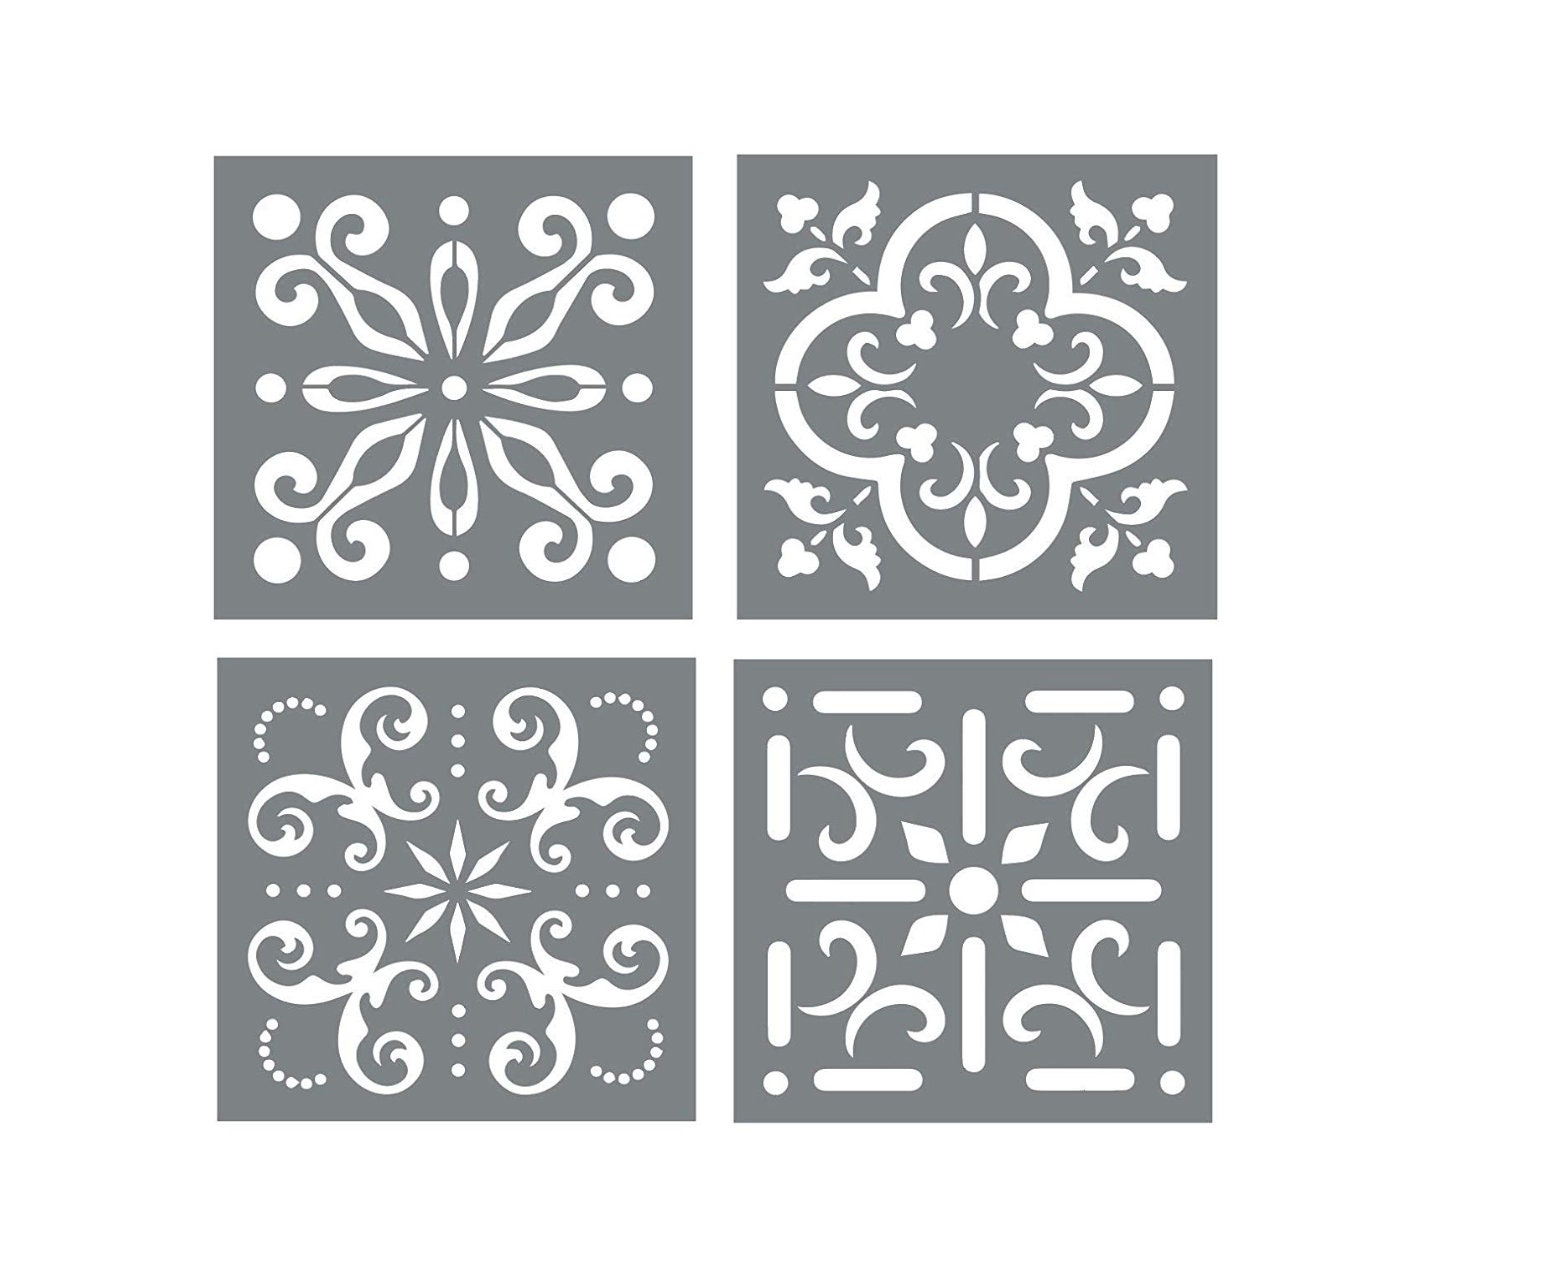  Set of Four 4-Inch Tile Stencils in a Modern Aztec Stencil  Pattern - Use as Floor Stencils or Wall Stencils, Update Your Furniture or  Create Artwork with Reusable Stencils for Painting